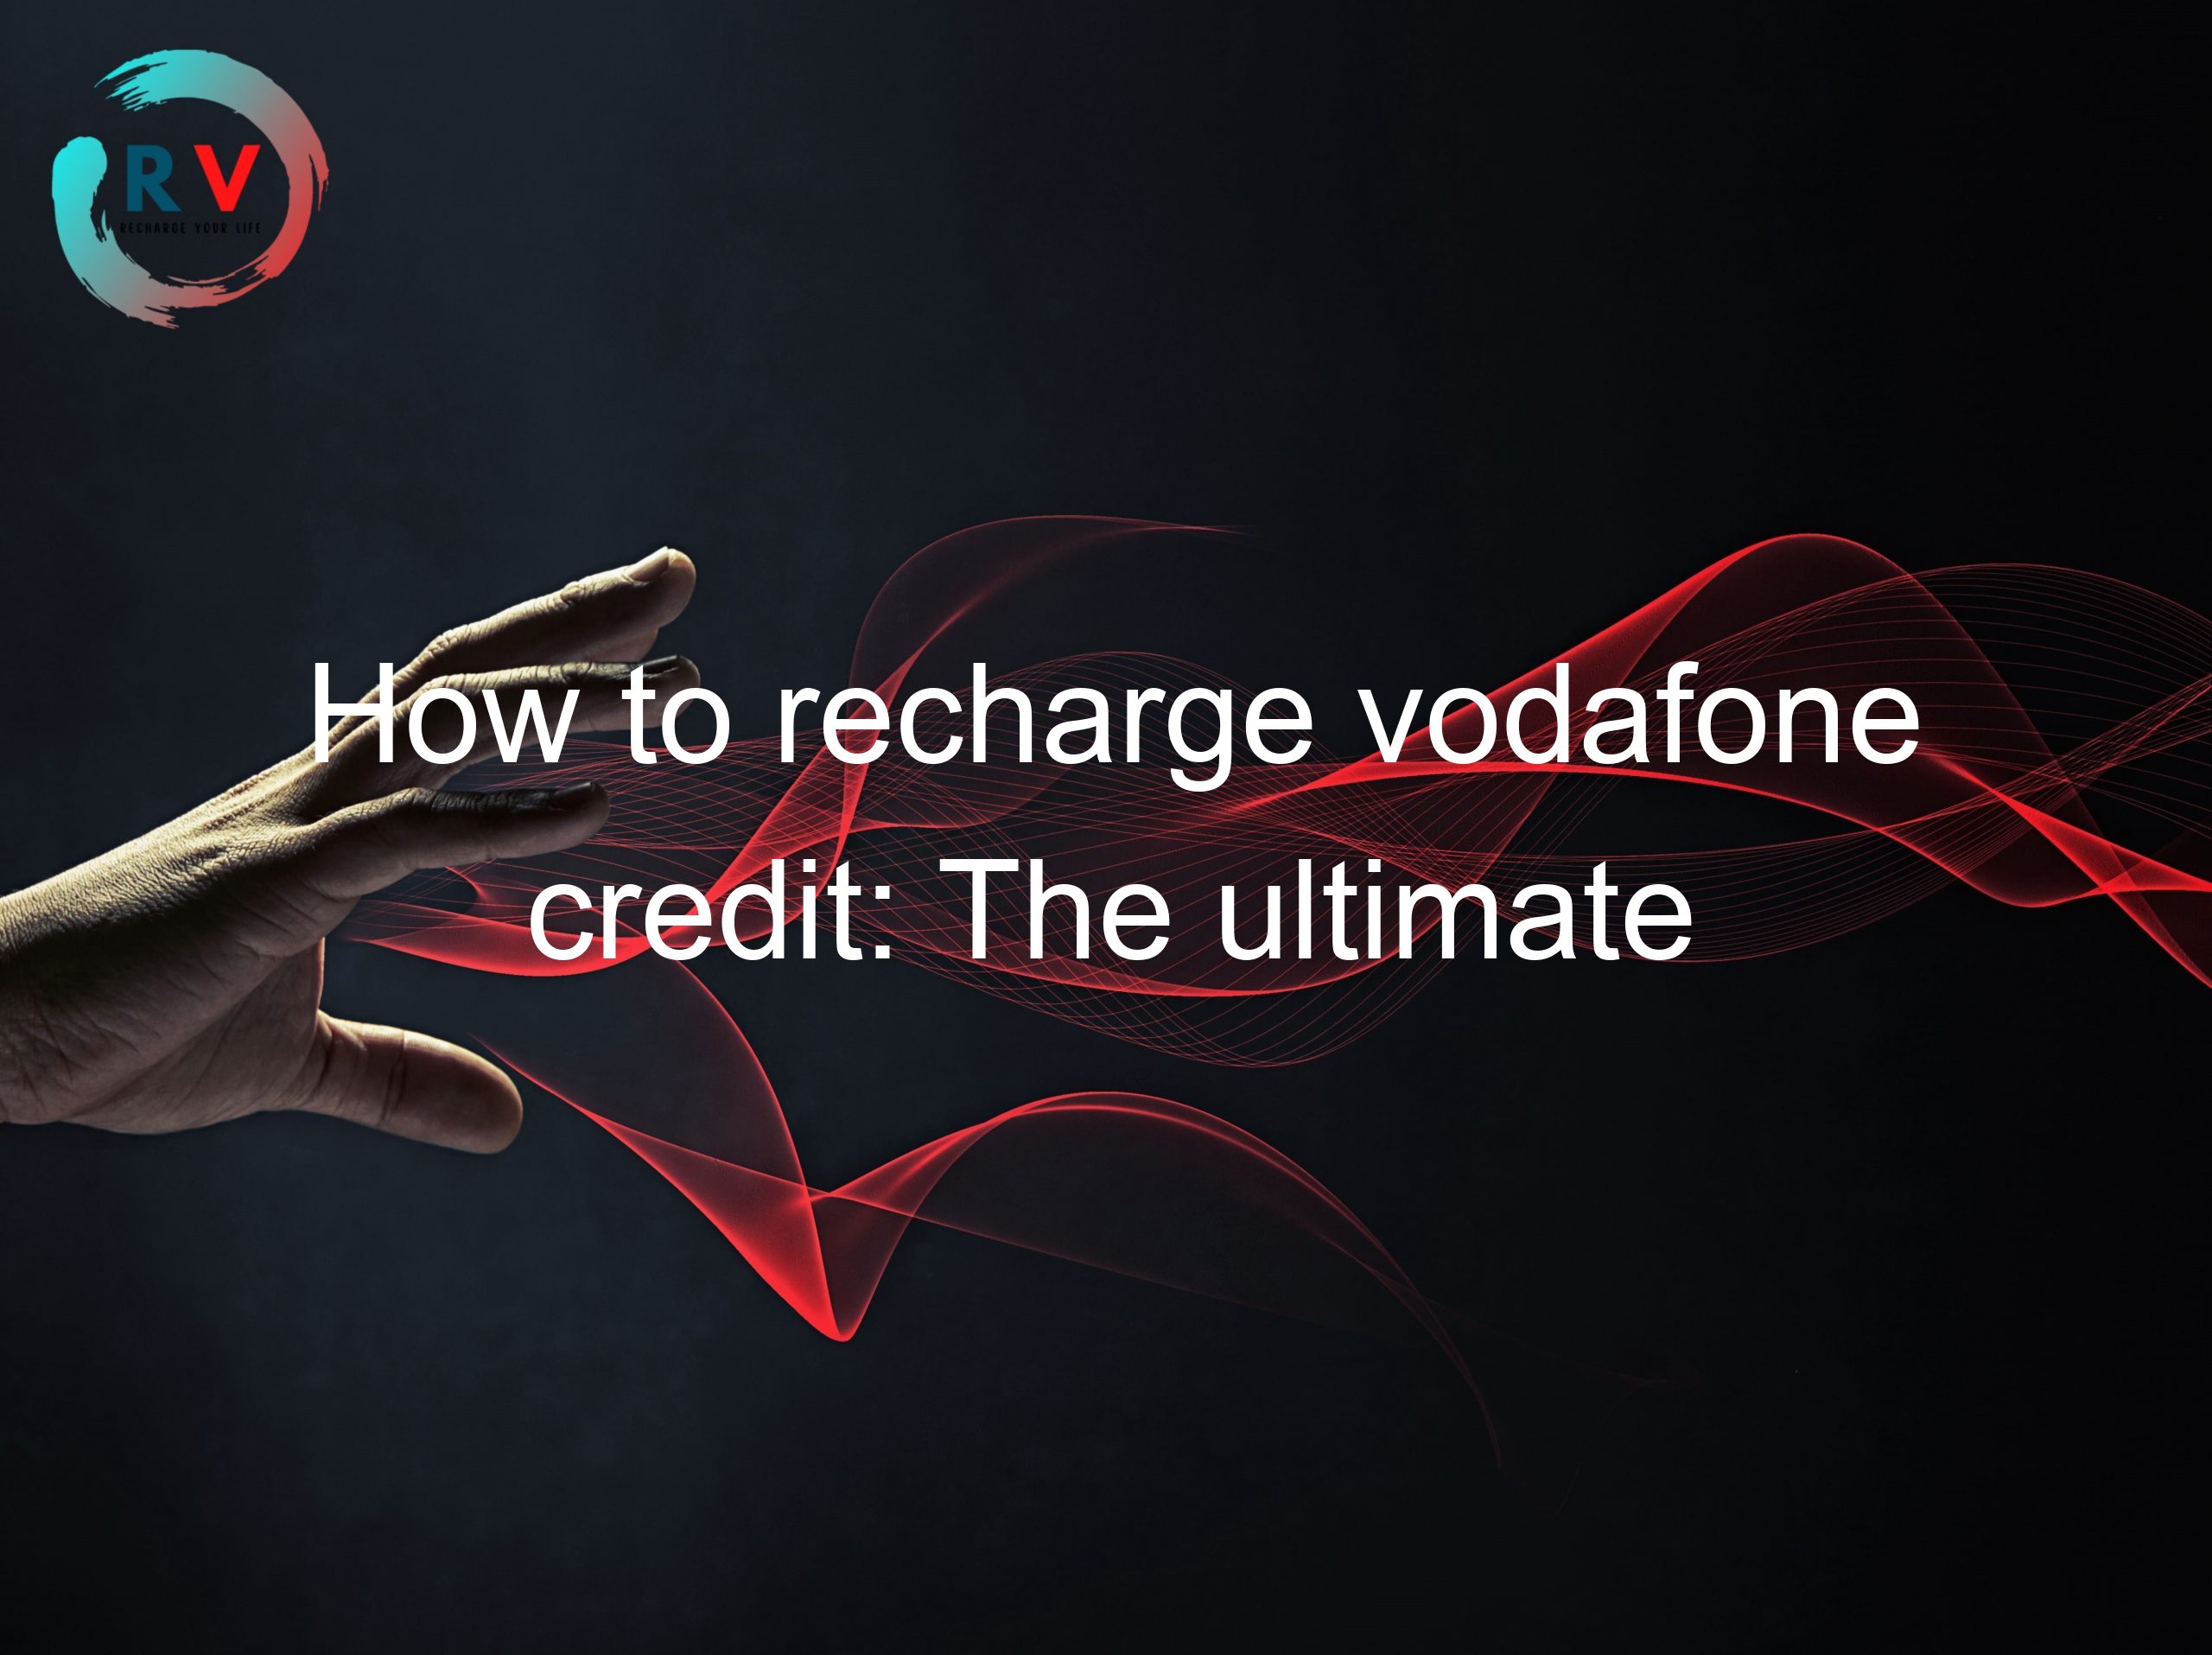 How to recharge vodafone credit: The ultimate guide